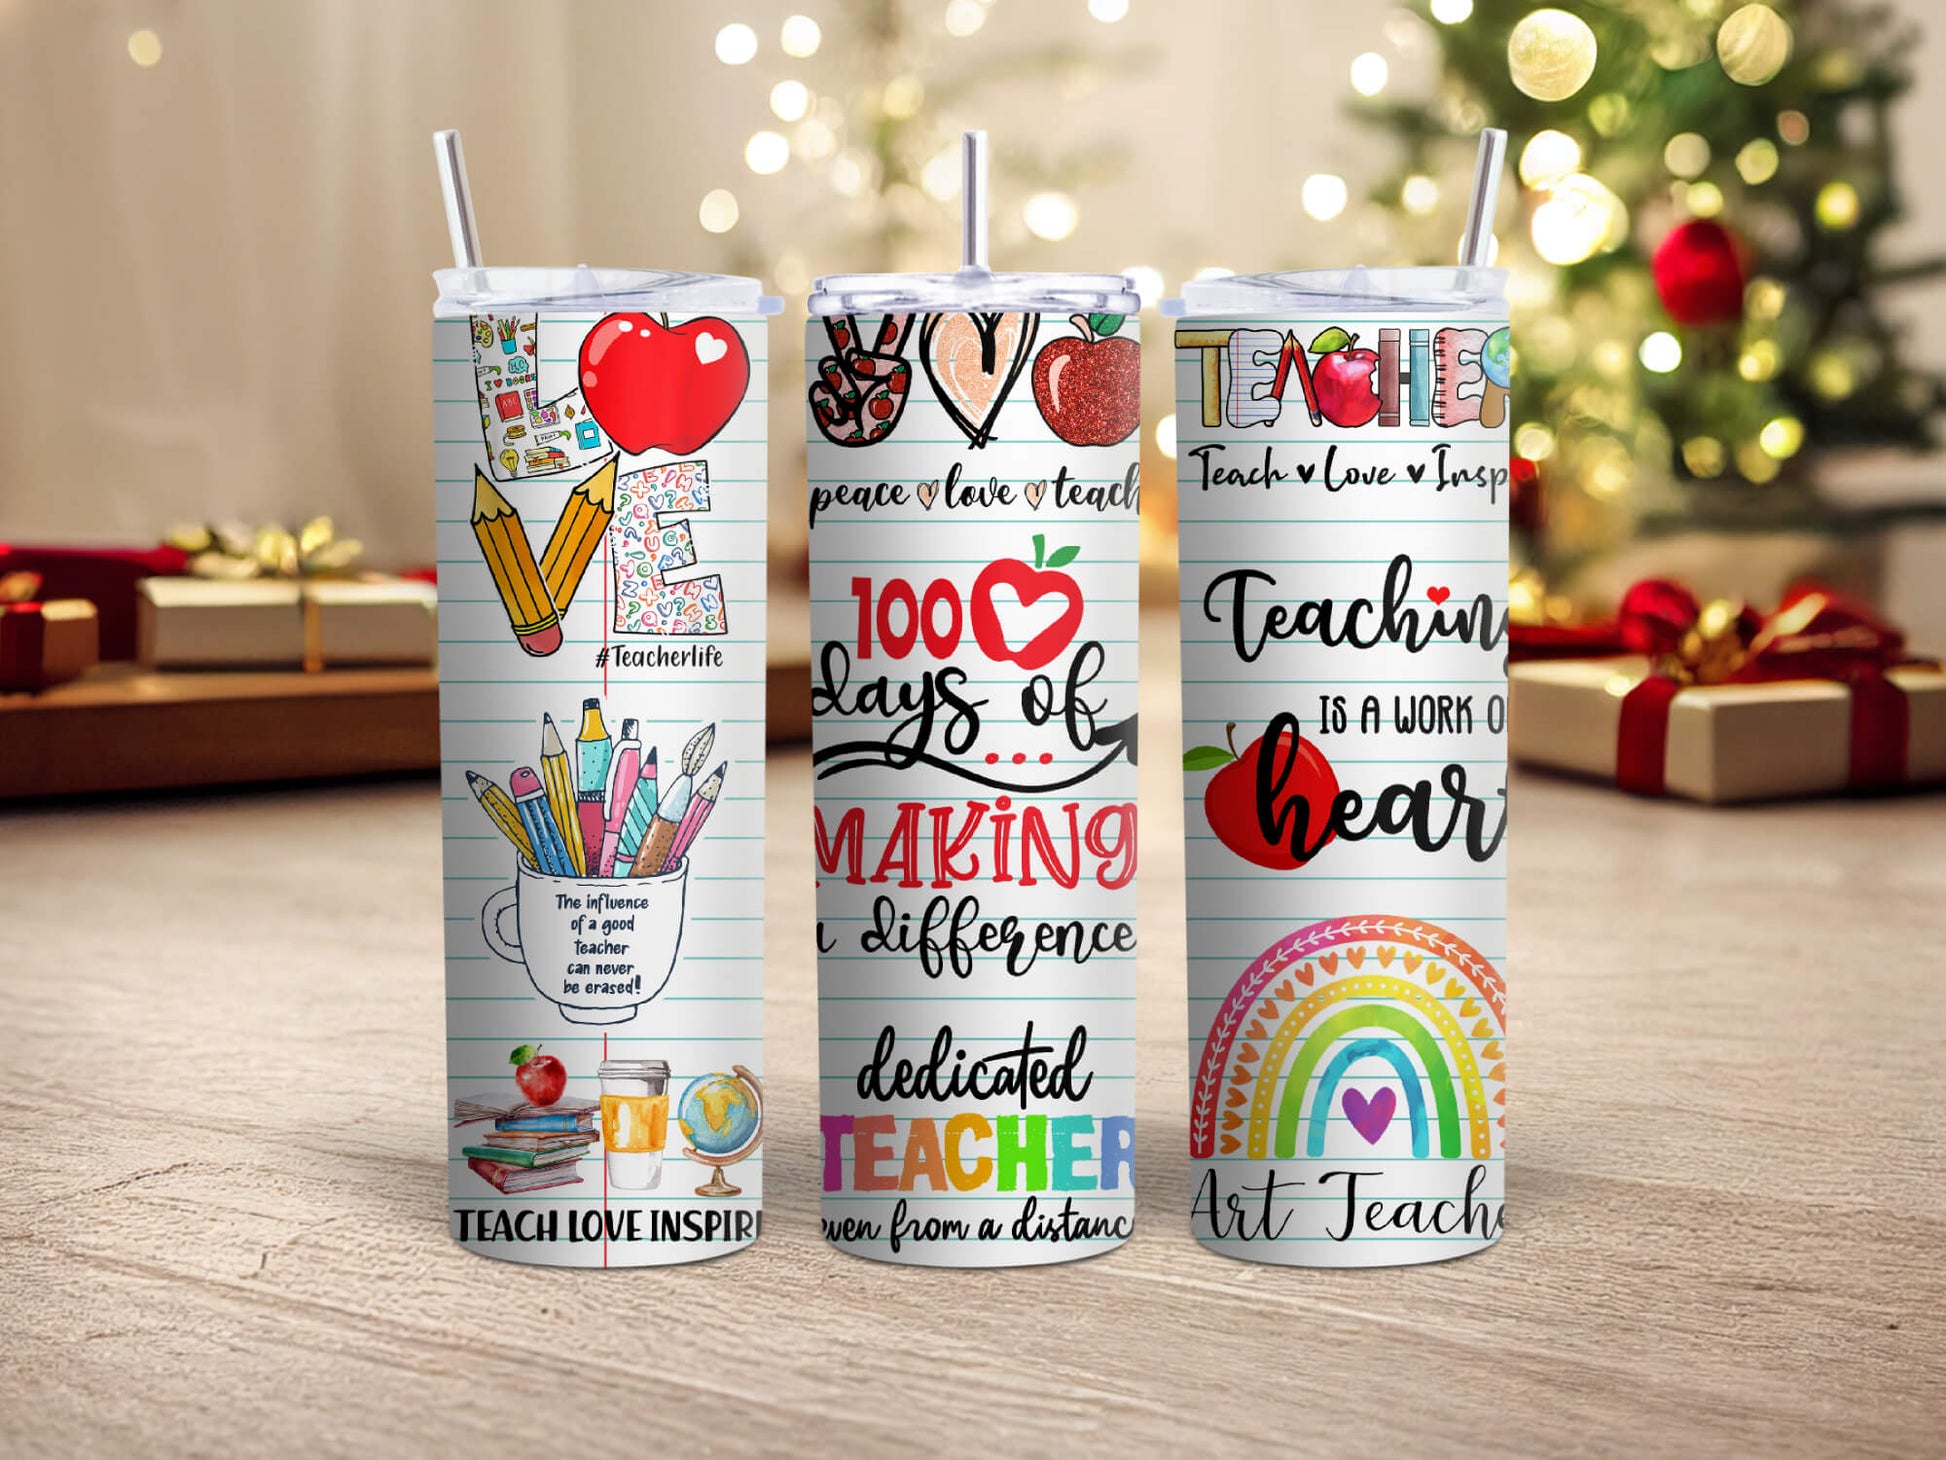 teachers day gift ideas, best teacher gifts, end of year teacher gift ideas,teachers day special gifts, teacher gifts, teacher appreciation week ideas, teacher appreciation gift ideas, teachers day special gifts, personalized teacher appreciation gift from student, teacher appreciation thank you gift, best teacher ever, tumbler for teachers, end of school gift, skinny tumbler with straw, virtual teacher gift, principal gift, 20oz skinny tumbler, teacher christmas, daycare provider gift